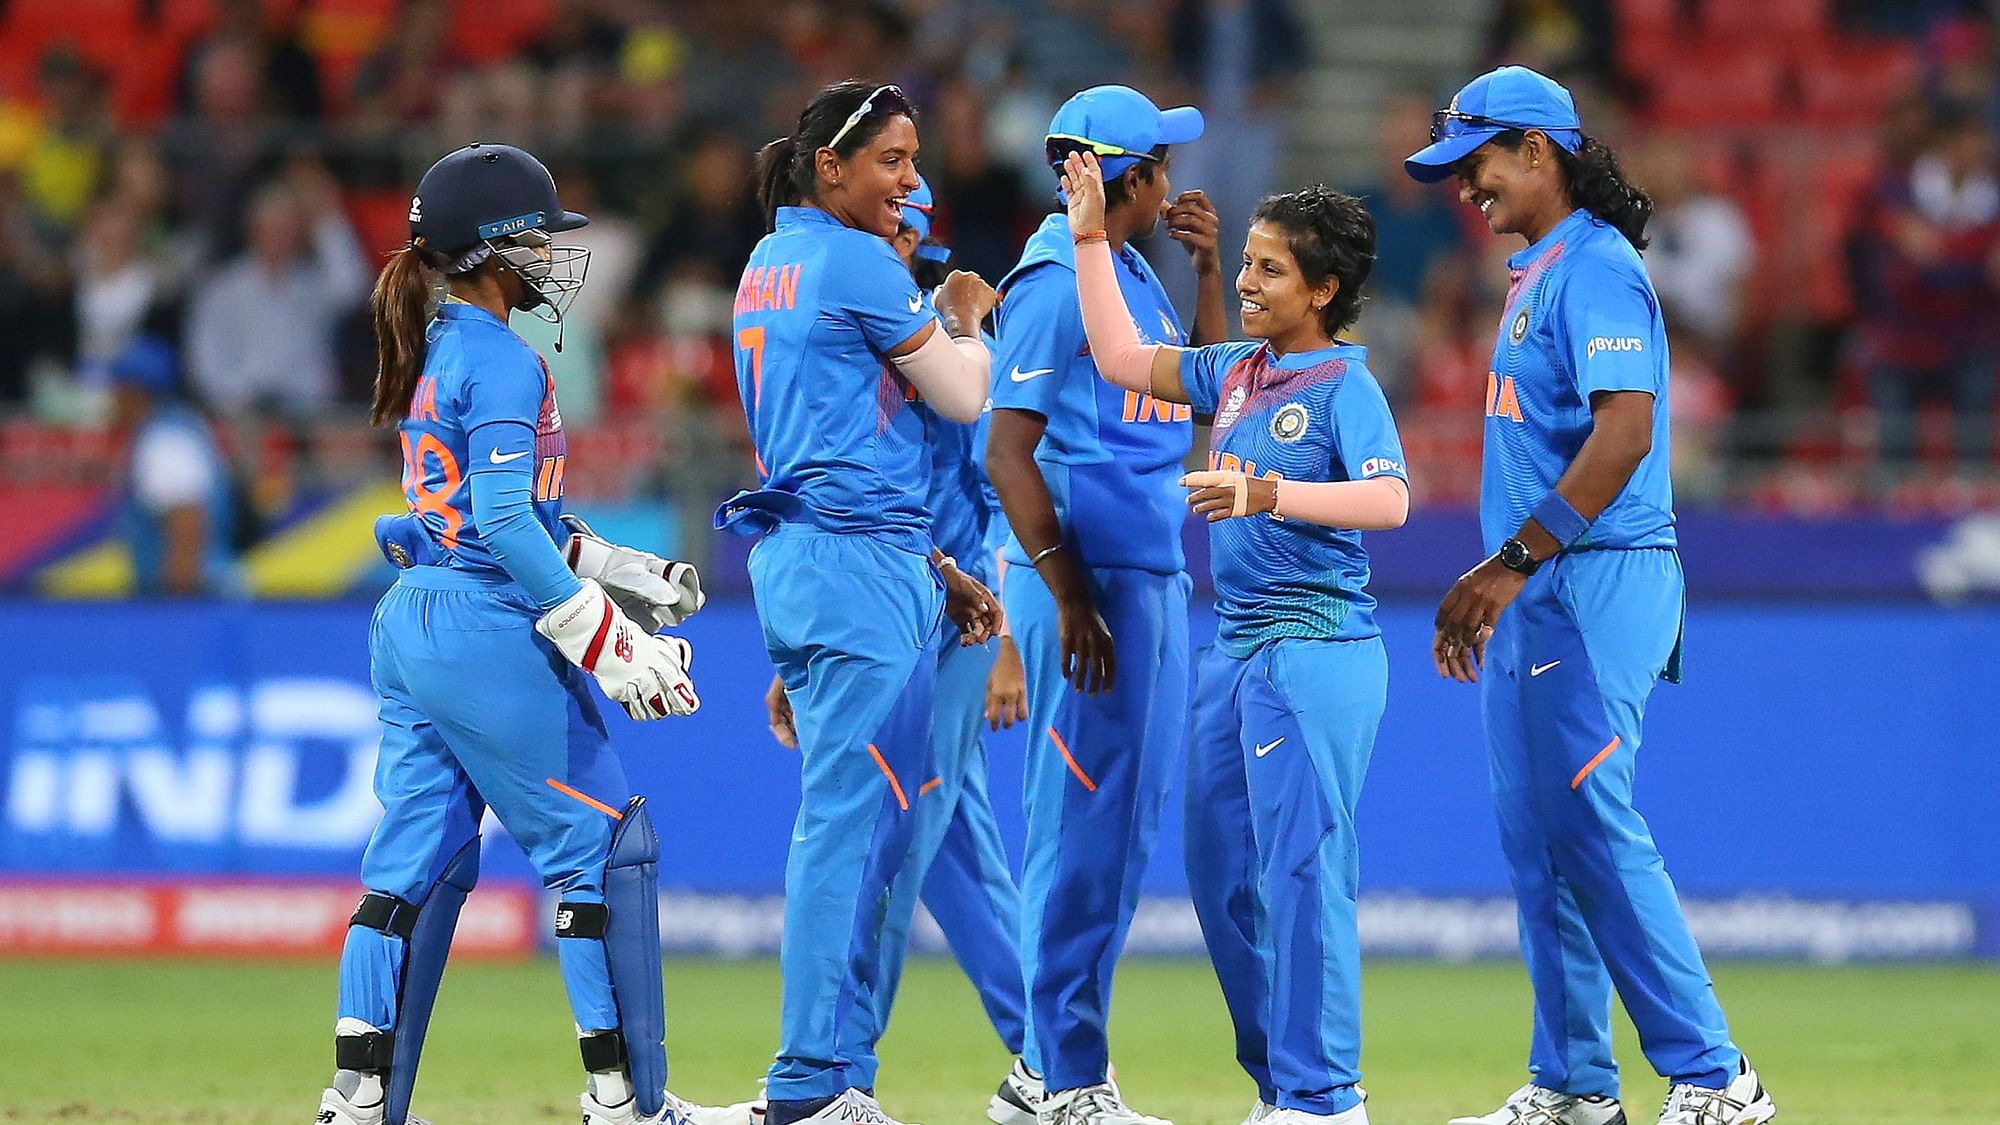 India beat Australia by 17 runs in the first match of the ICC Women’s T20 World Cup